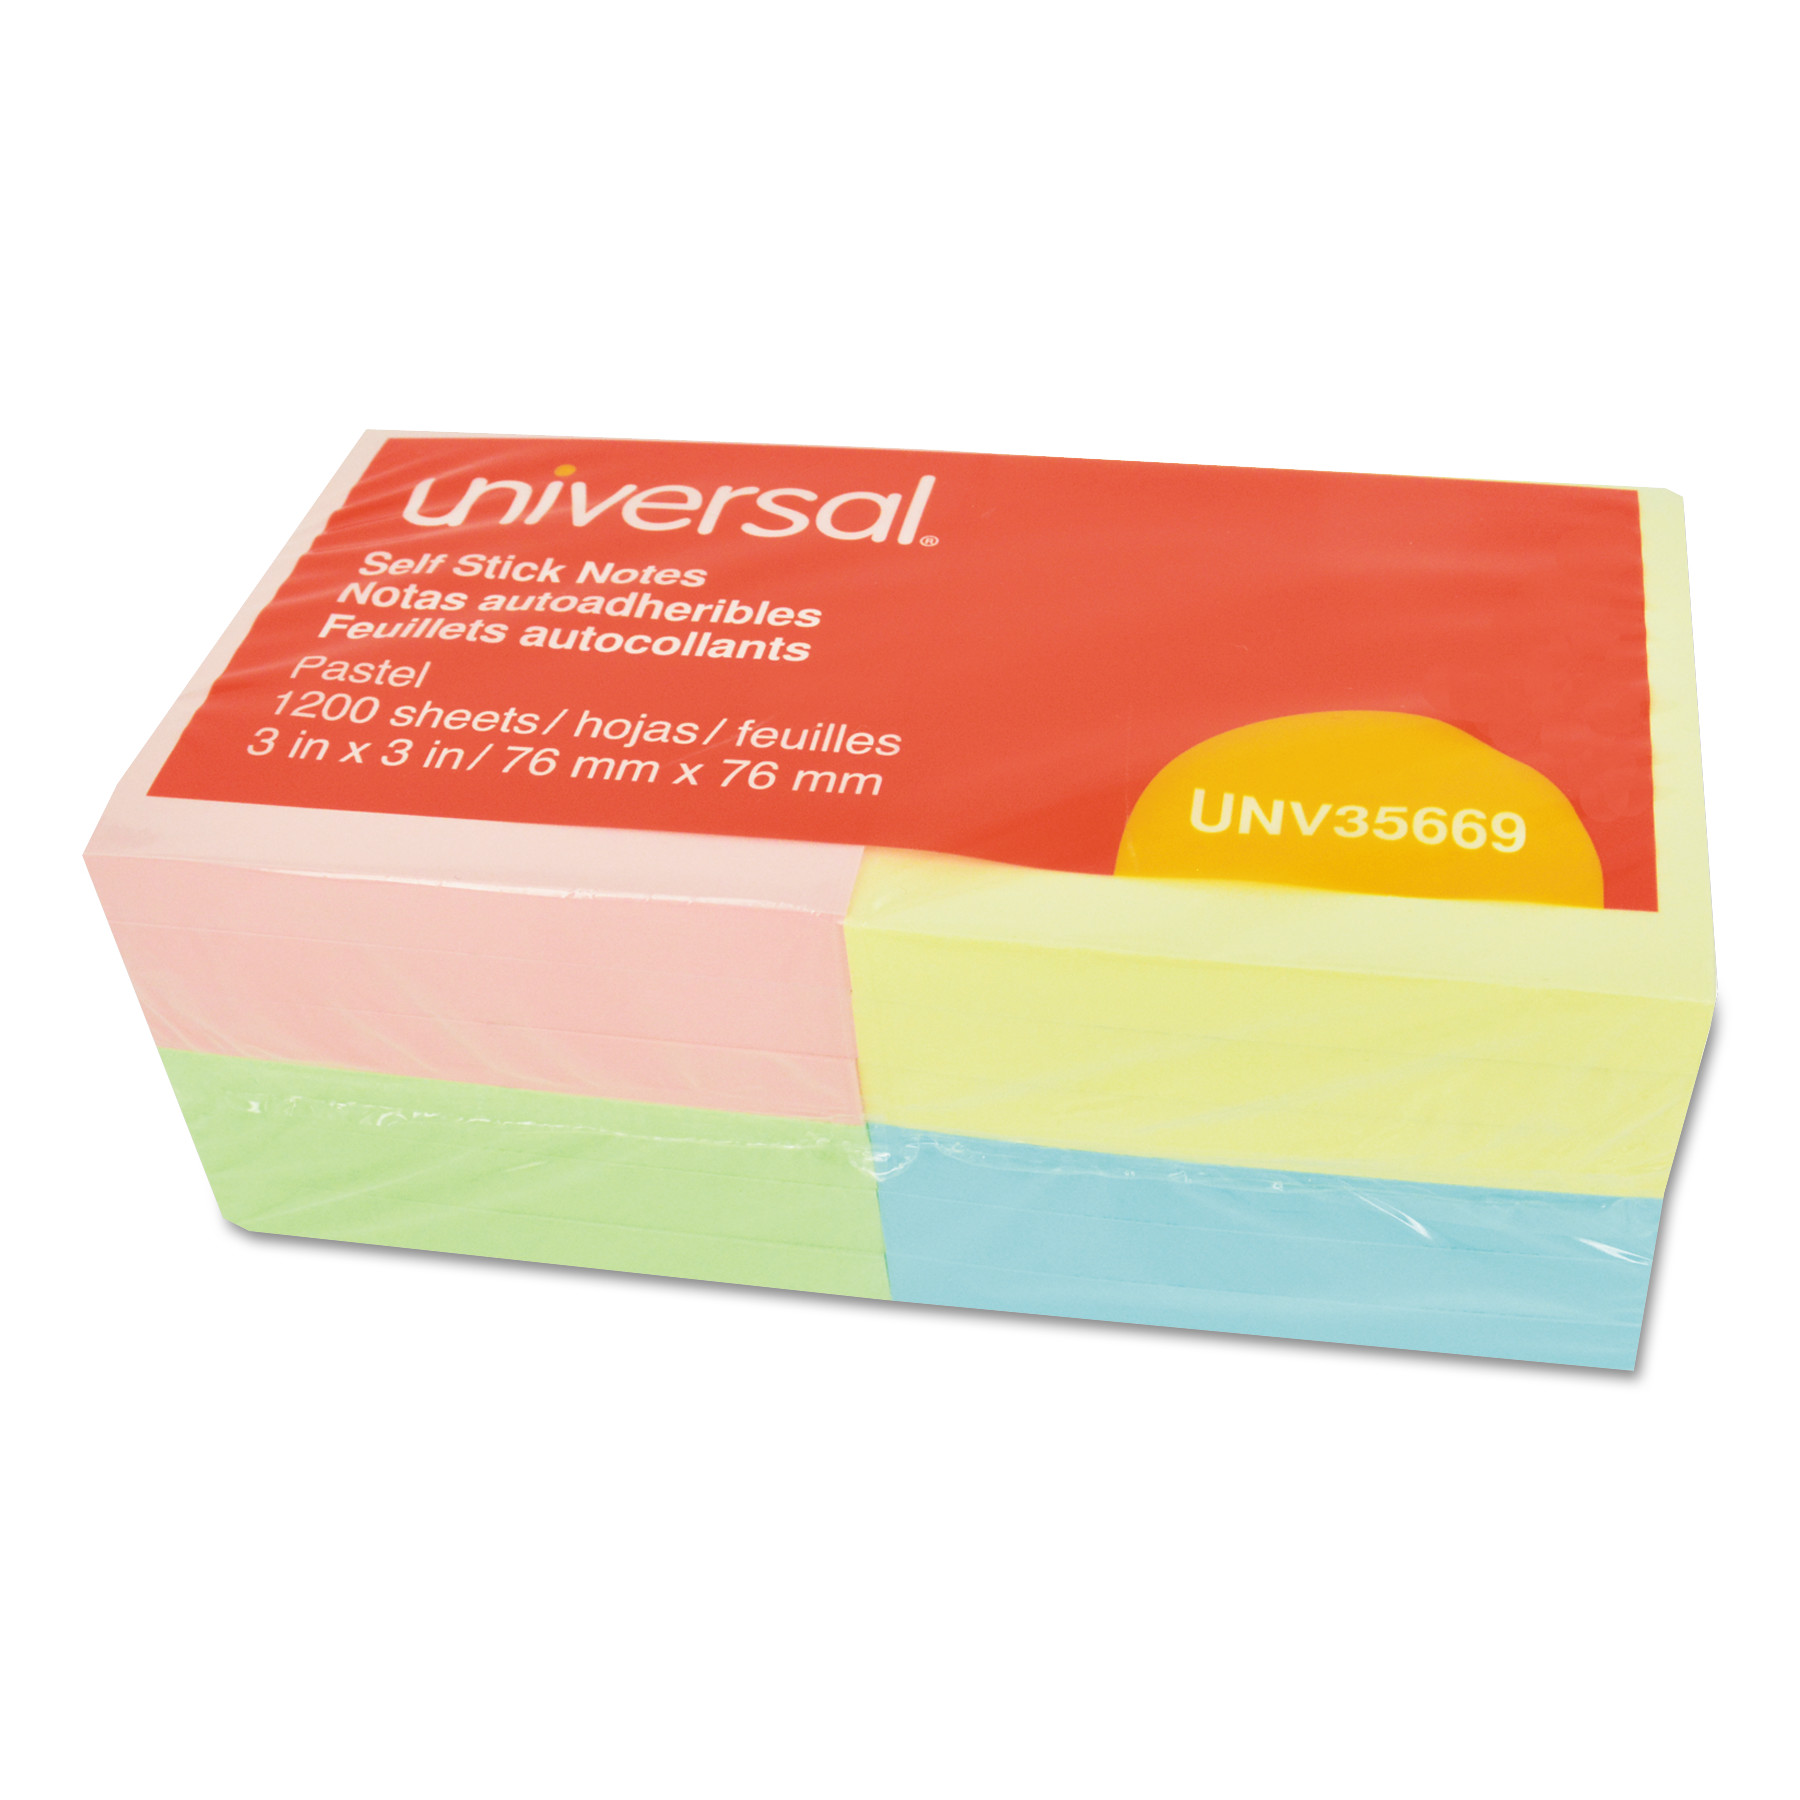  Universal UNV35669 Self-Stick Note Pads, 3 x 3, Assorted Pastel Colors, 100-Sheet, 12/Pack (UNV35669) 